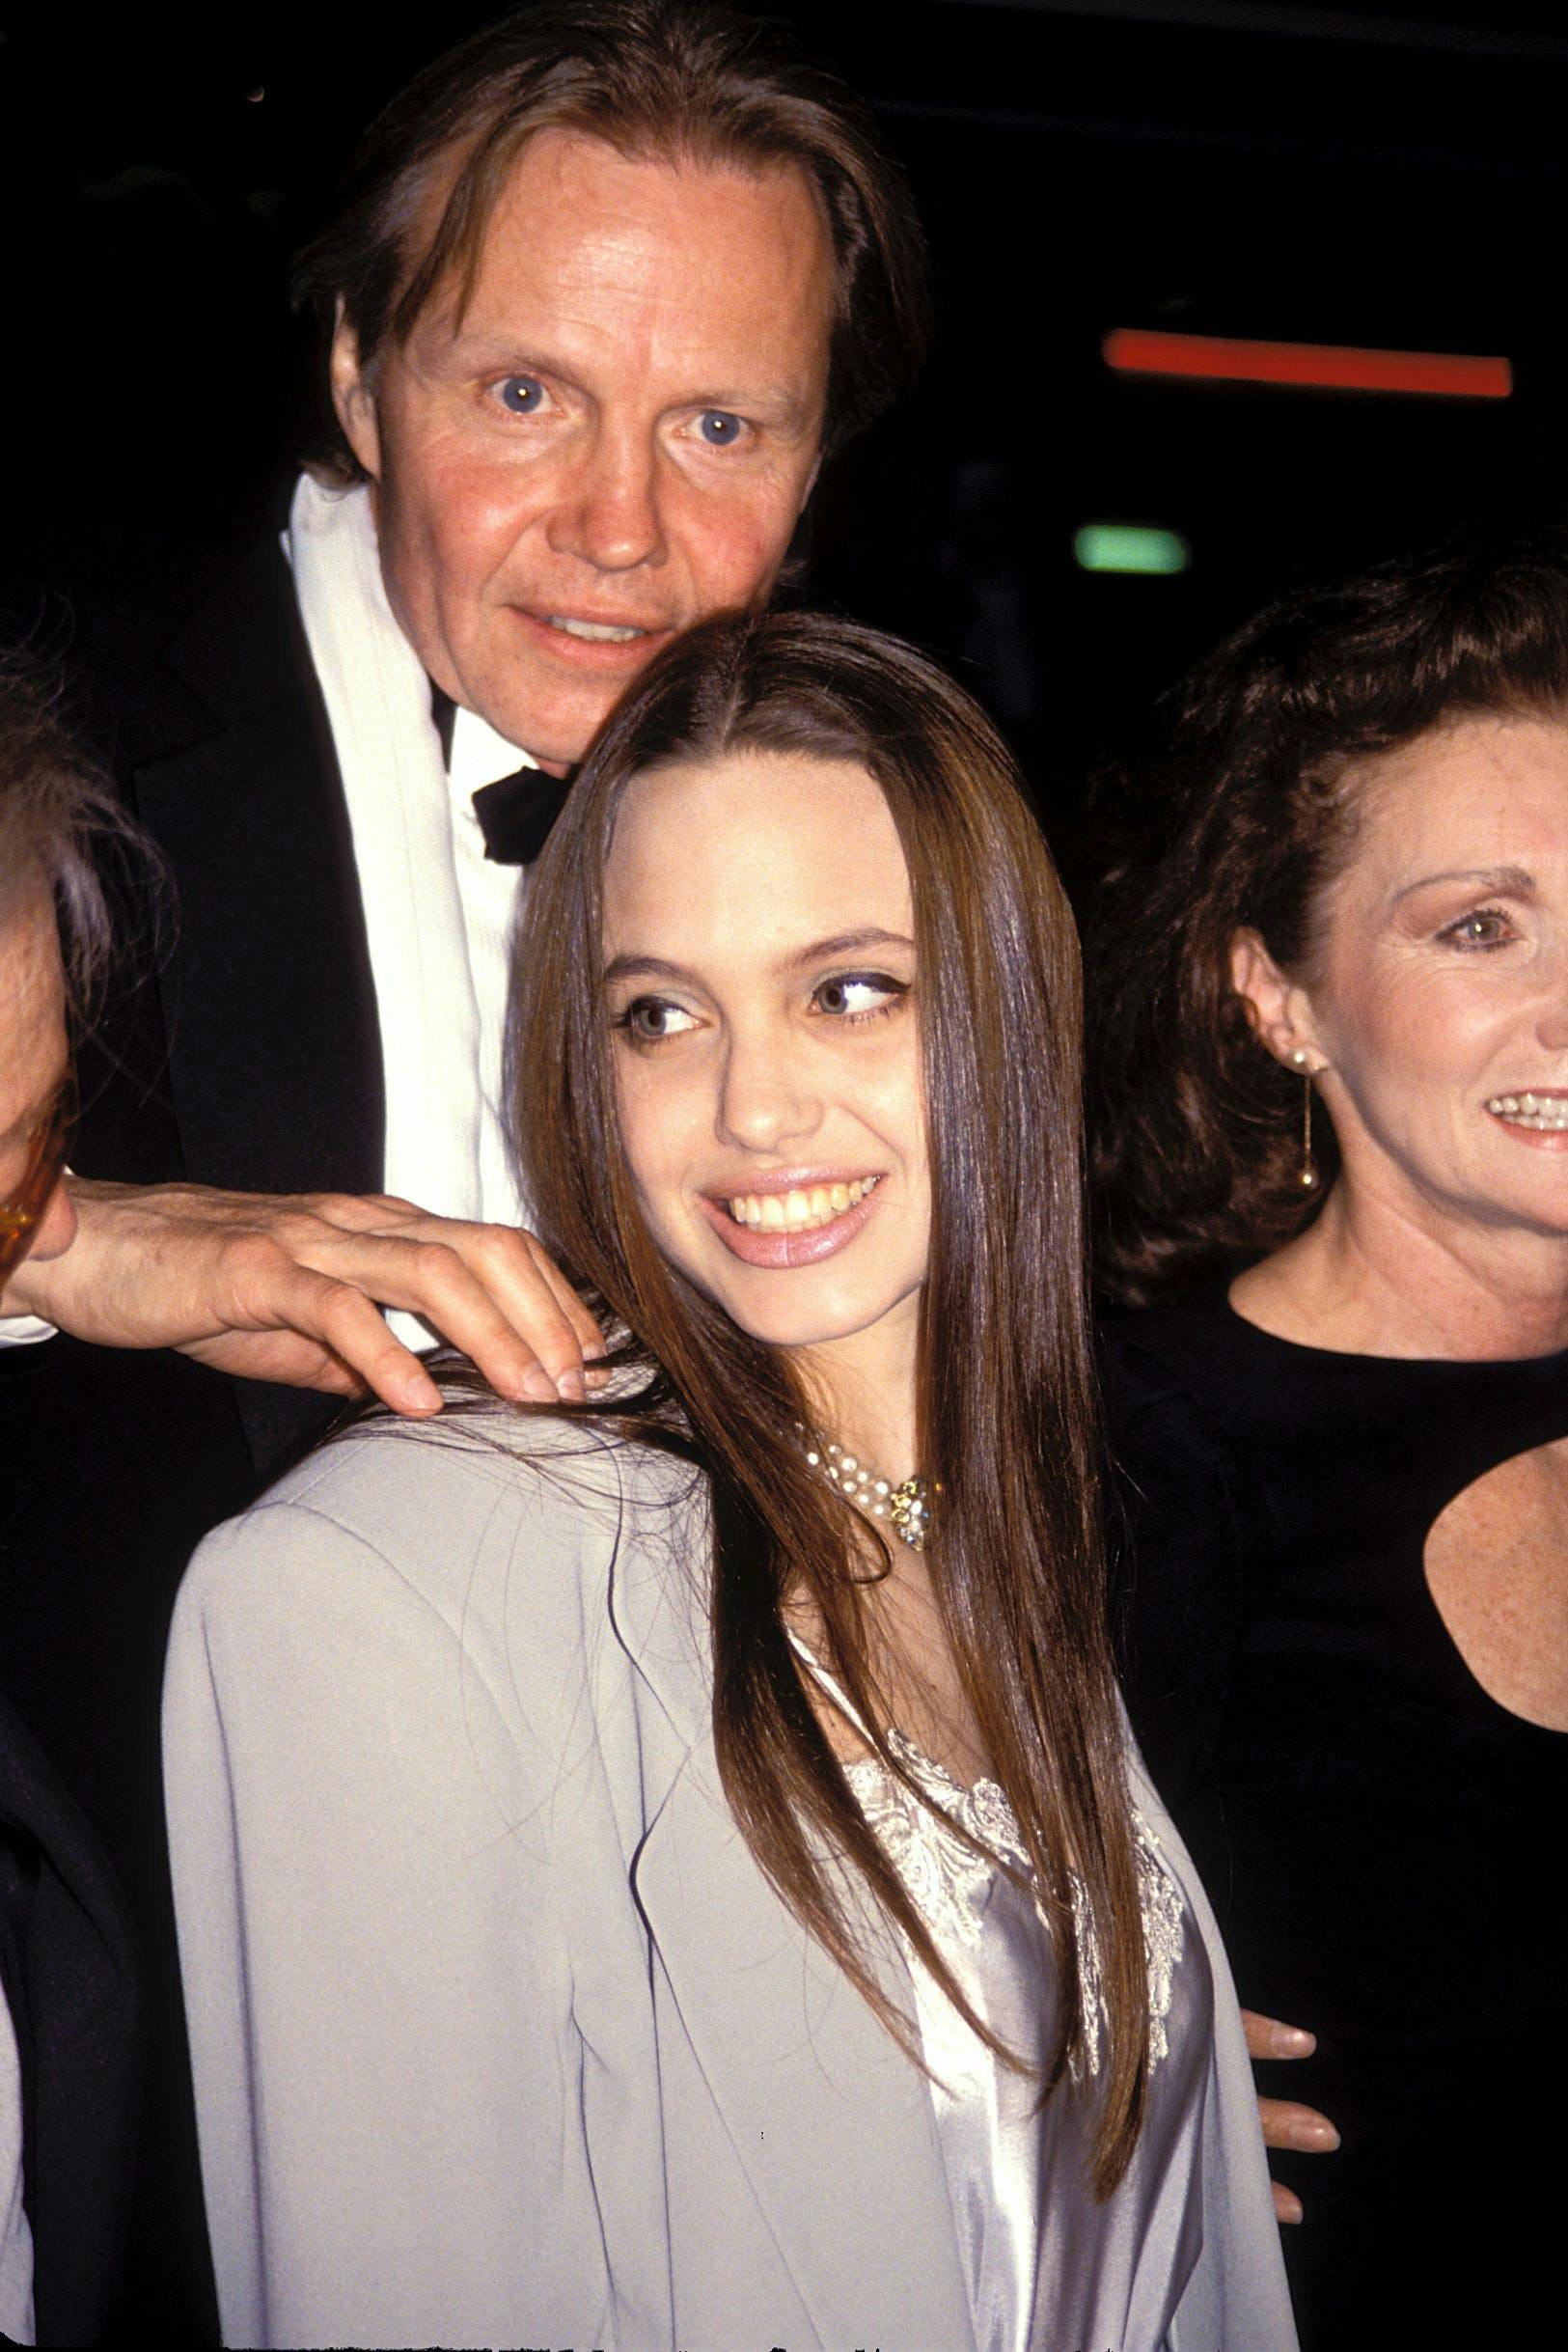 From 90s goth to Buckingham Palace chic: Angelina Jolie's best looks, Fashion